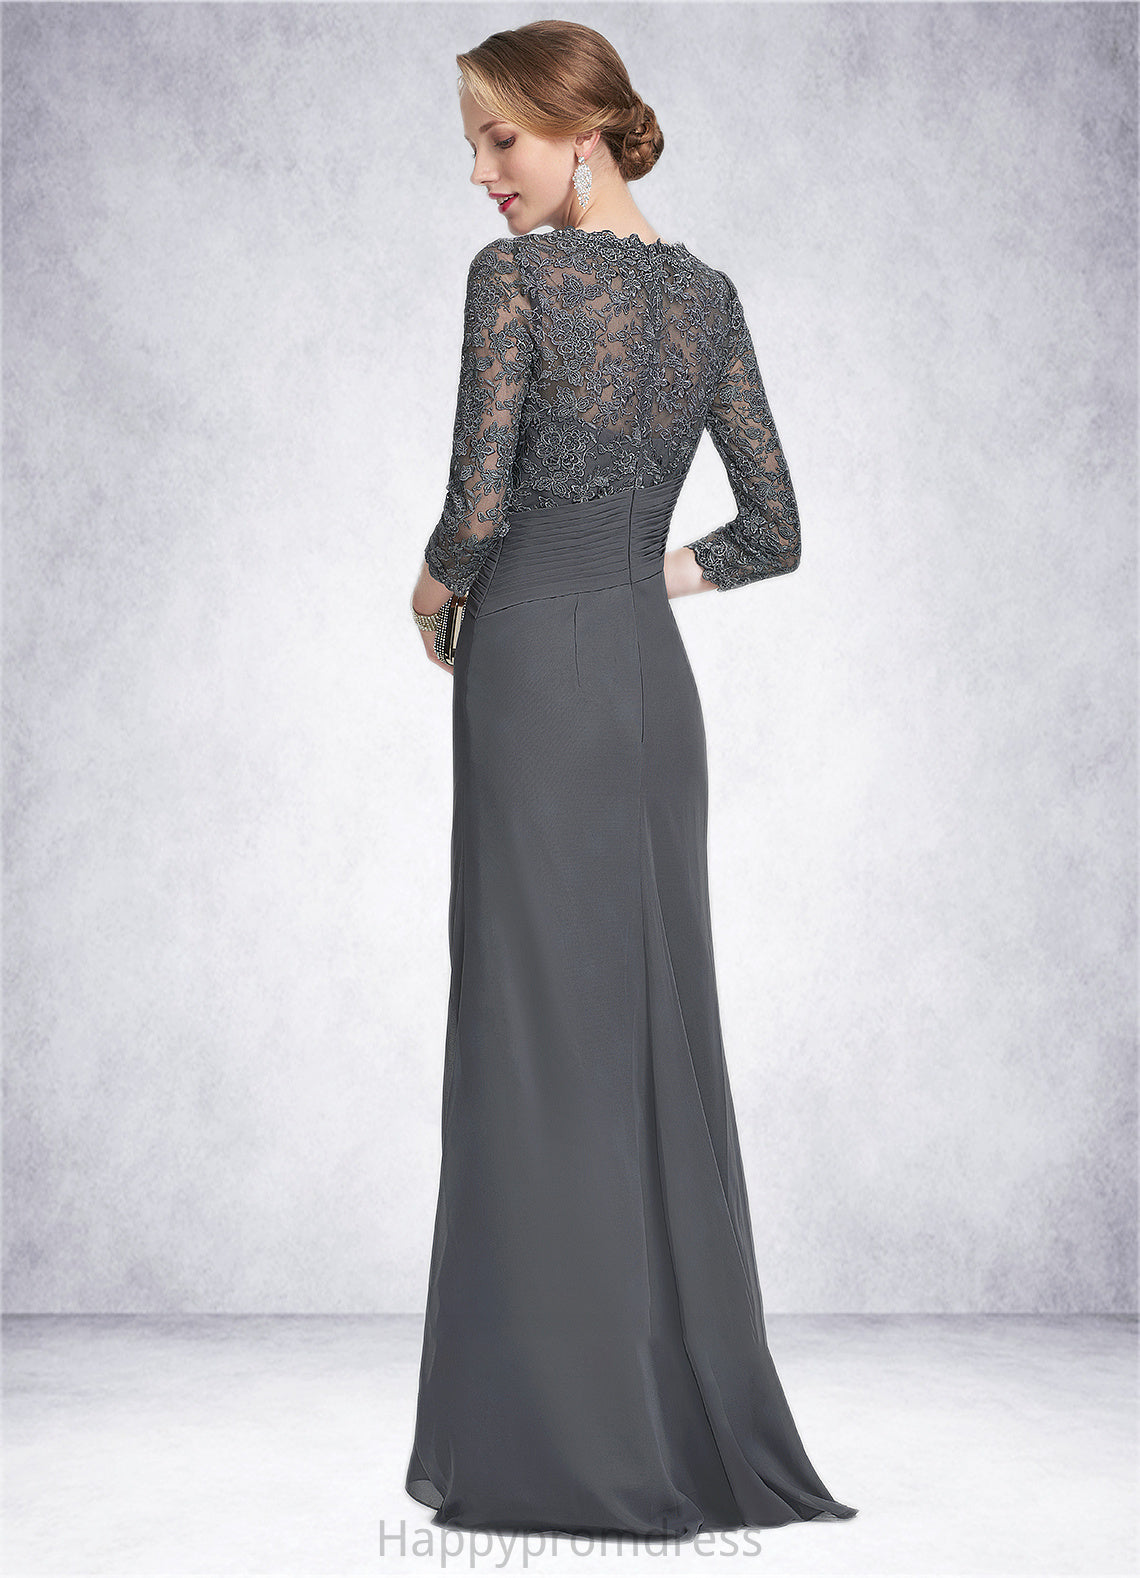 Stella Sheath/Column Scoop Neck Floor-Length Chiffon Lace Mother of the Bride Dress With Ruffle XXS126P0014611